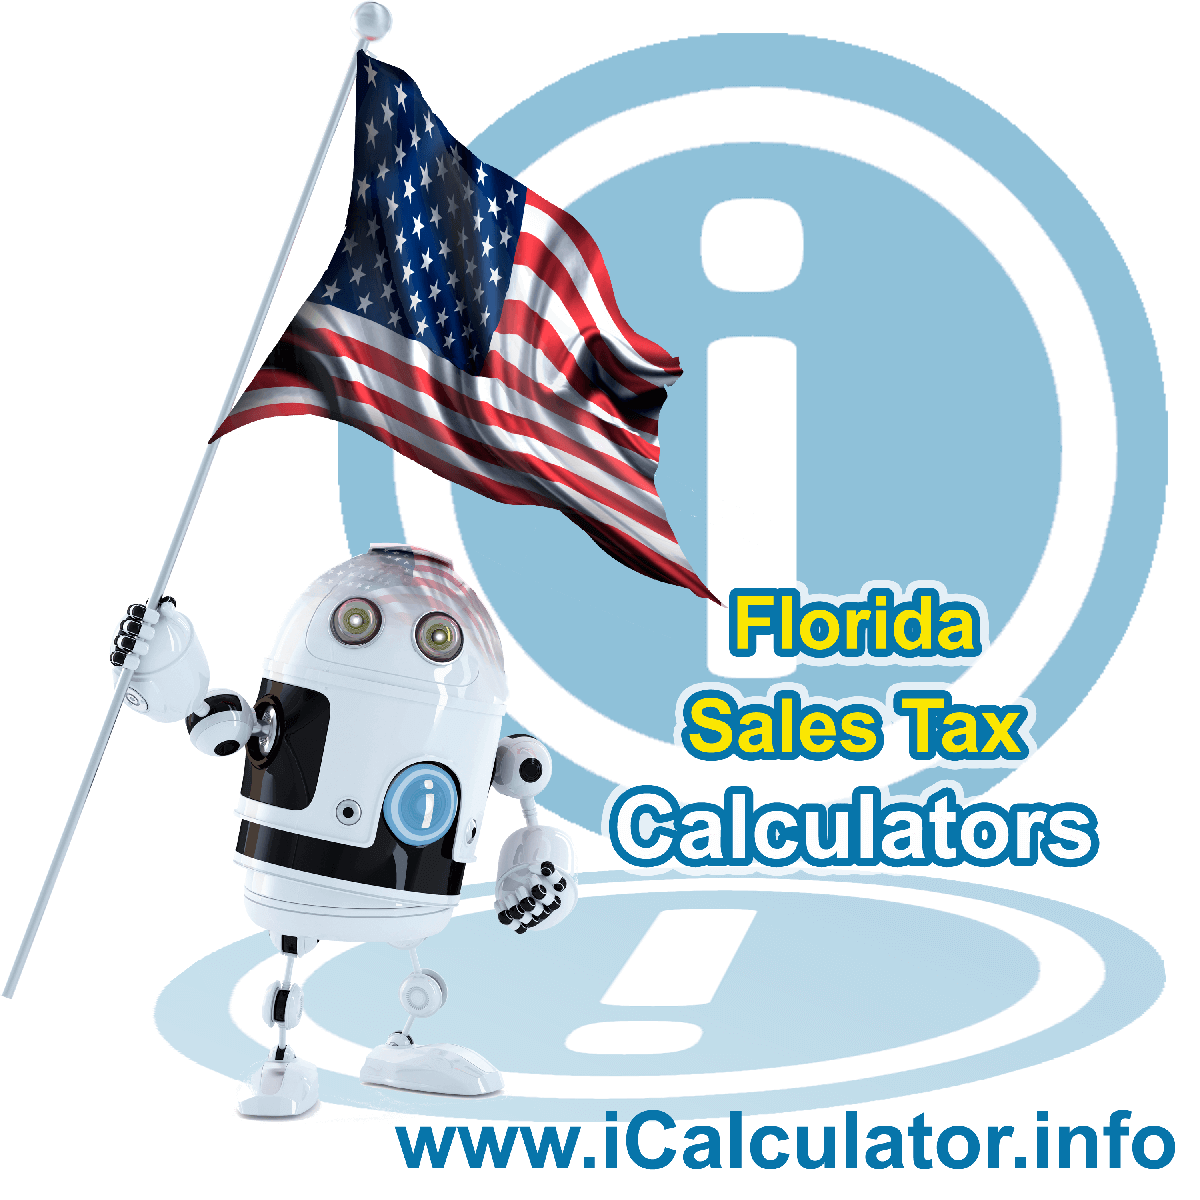 Pompano Beach Sales Rates: This image illustrates a calculator robot calculating Pompano Beach sales tax manually using the Pompano Beach Sales Tax Formula. You can use this information to calculate Pompano Beach Sales Tax manually or use the Pompano Beach Sales Tax Calculator to calculate sales tax online.